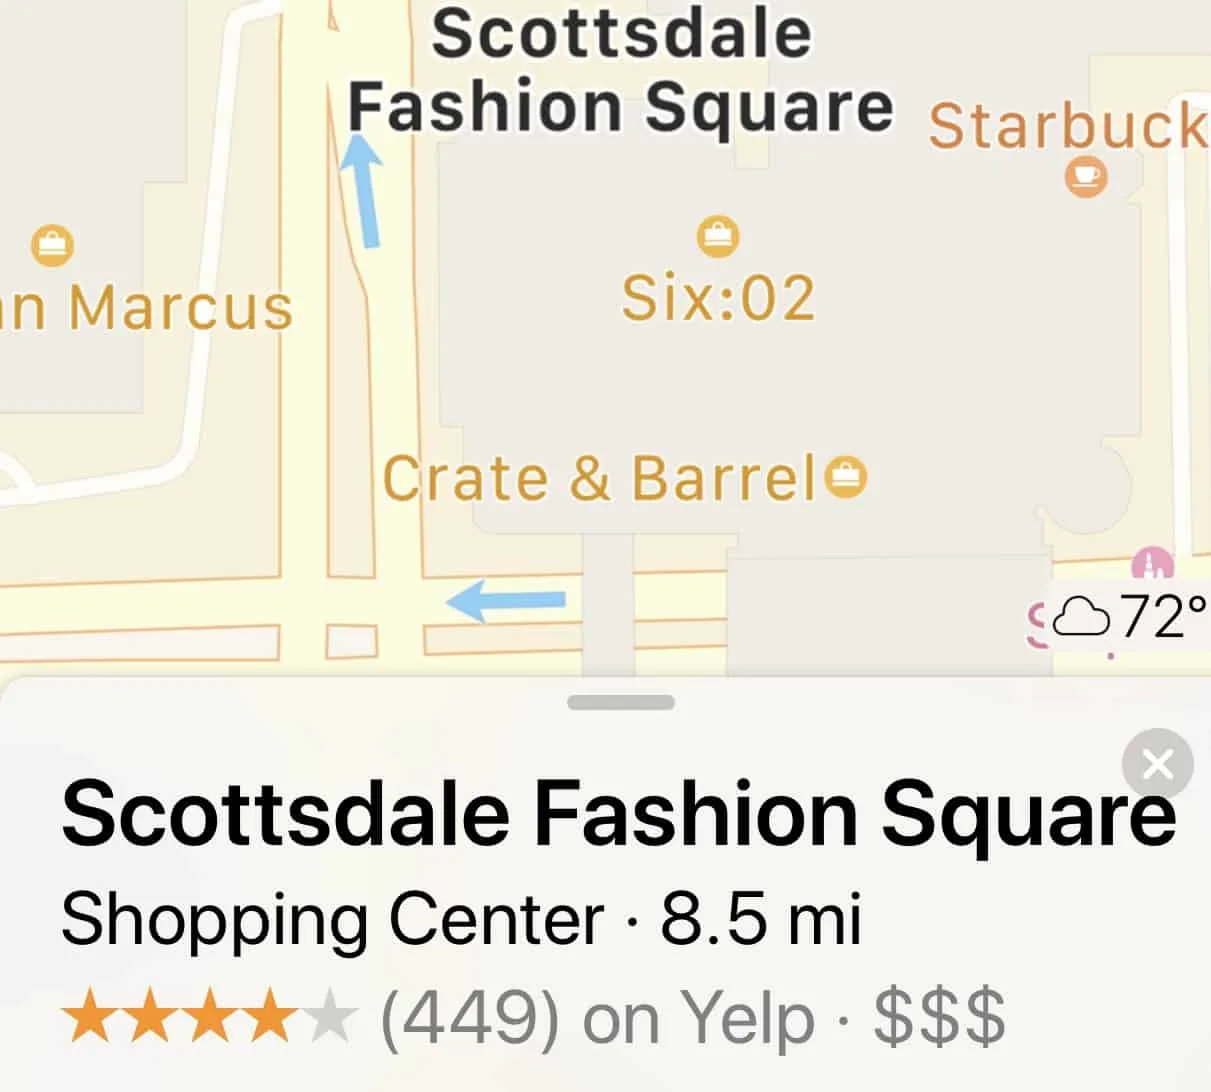 Holiday Road Trip Tips: Take a Trip, Travel Locally, GPS map to Scottsdale Fashion Square